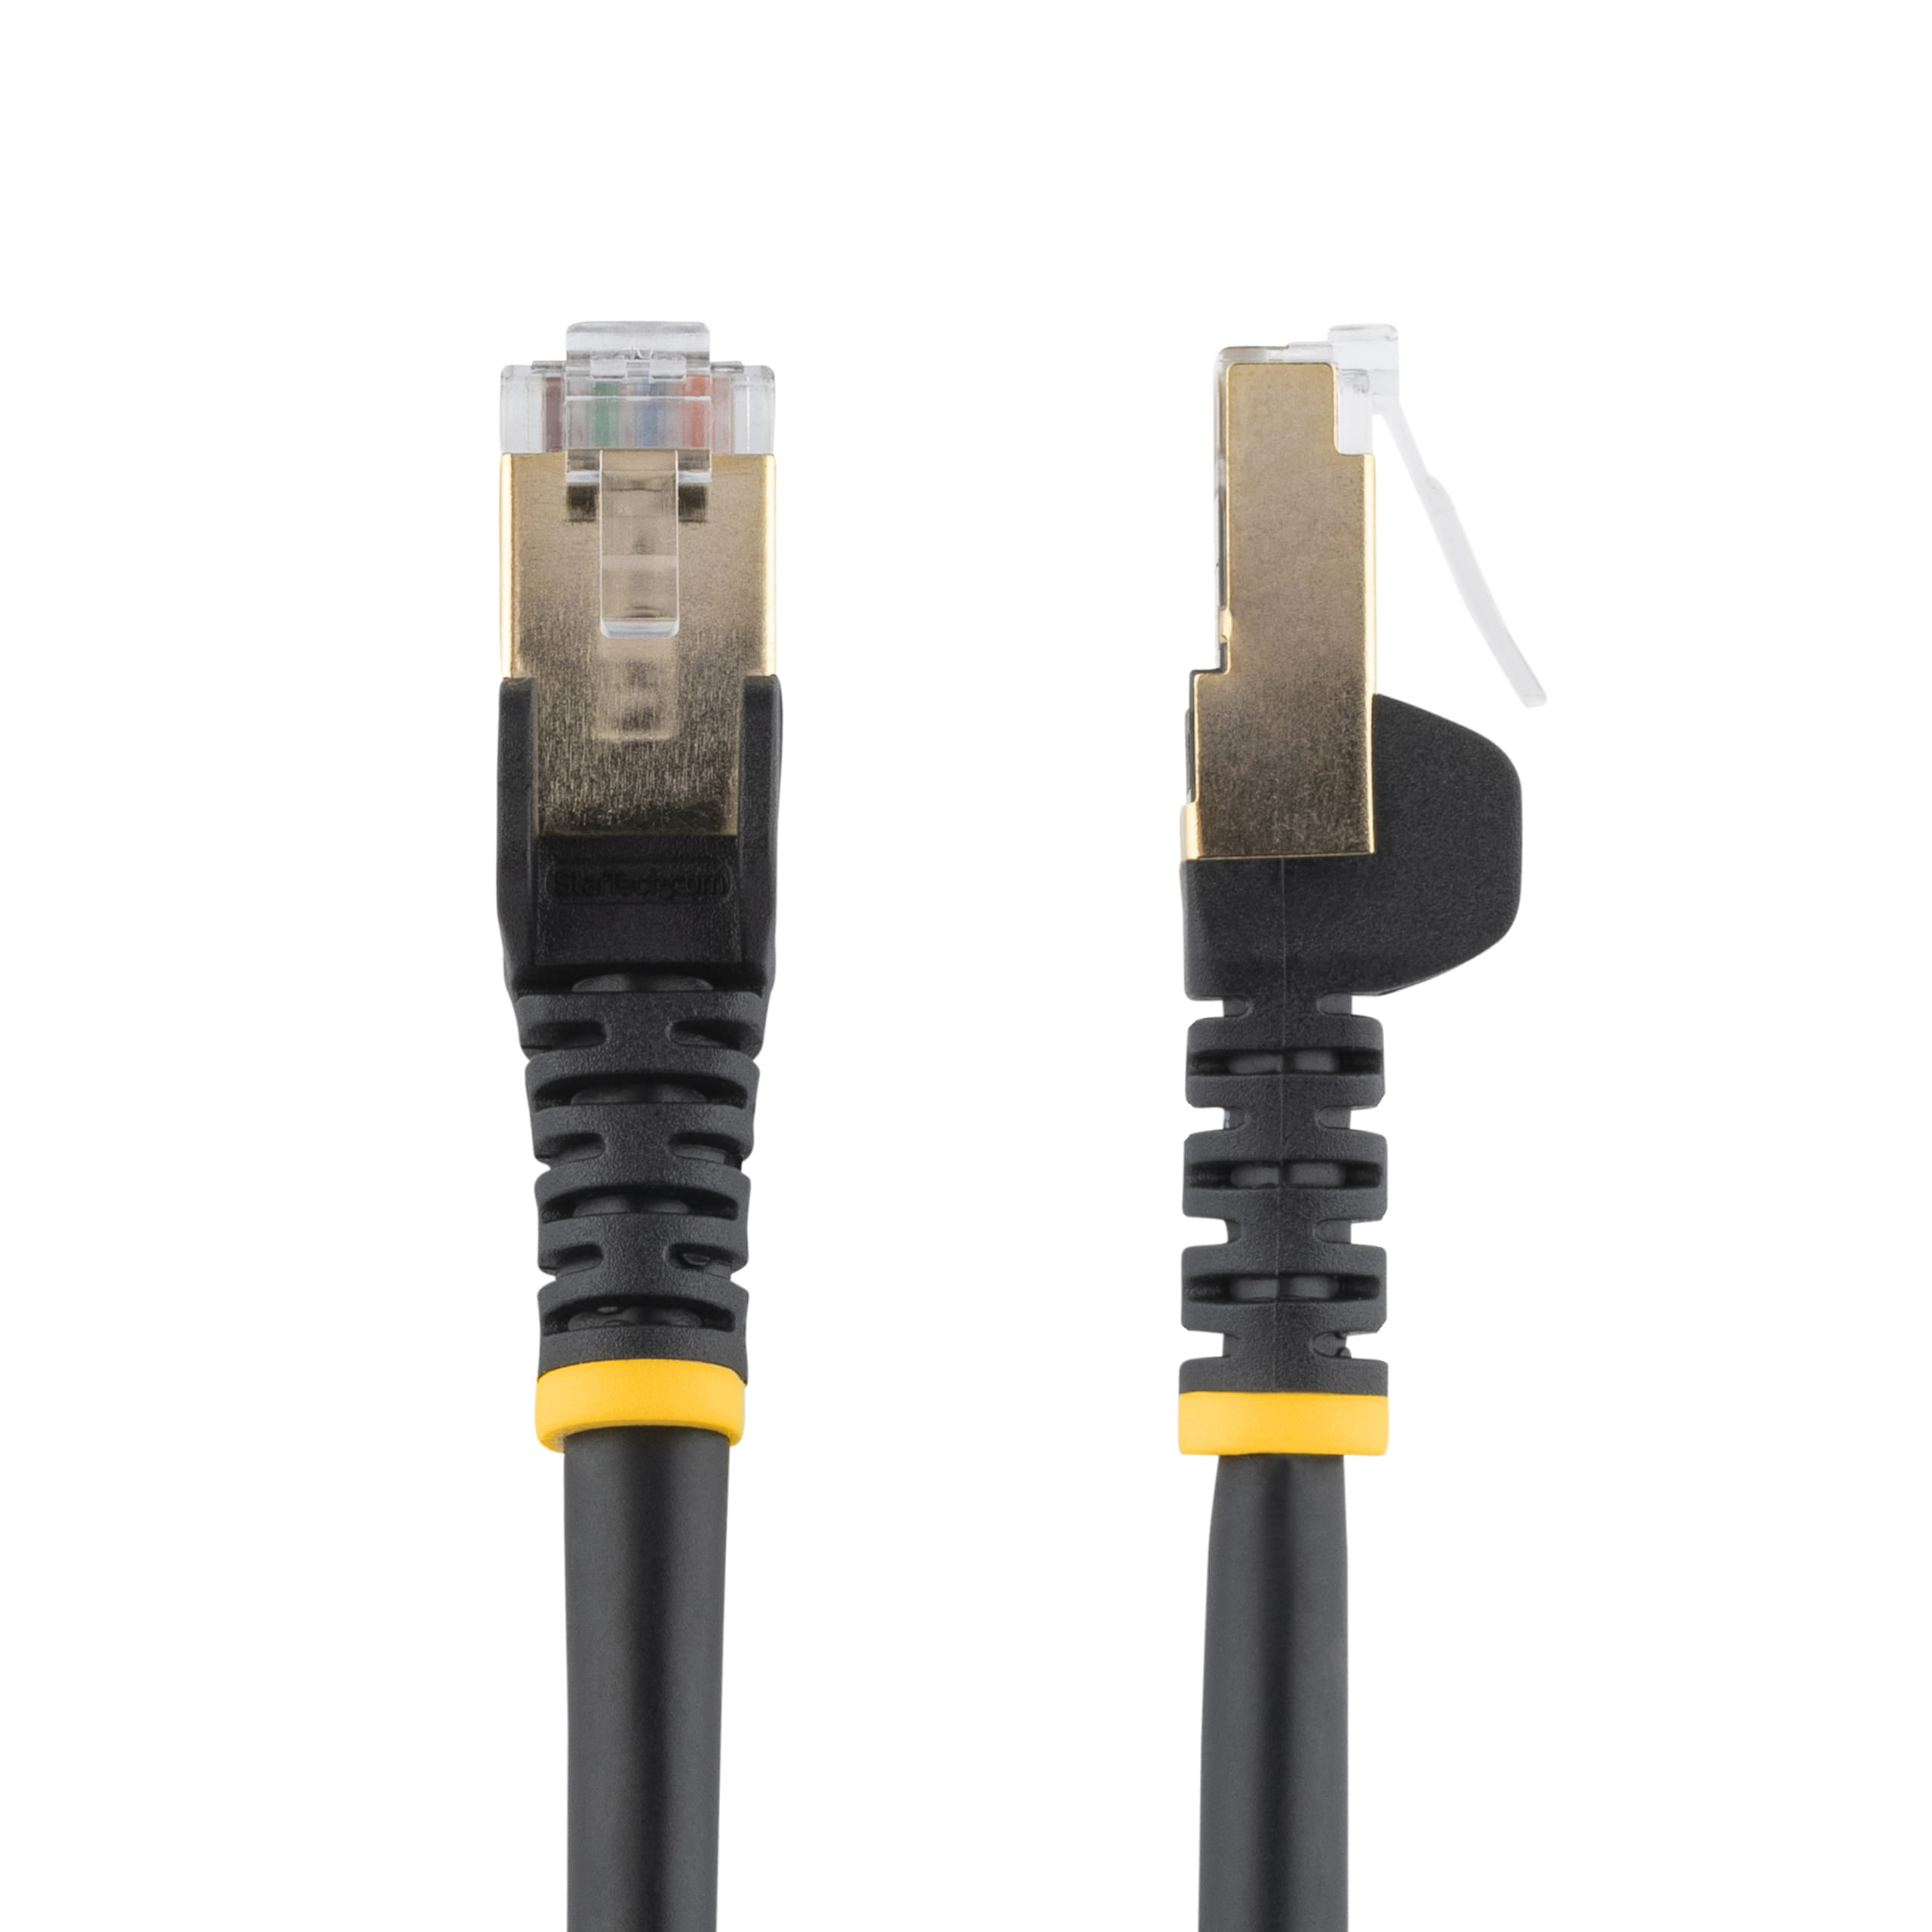 StarTech.com 2m CAT6A Ethernet Cable, 10 Gigabit Shielded Snagless RJ45 100W PoE Patch Cord, CAT 6A 10GbE STP Network Cable w/Strain Relief, Black, Fluke Tested/UL Certified Wiring/TIA - Category 6A - 26AWG (6ASPAT2MBK)